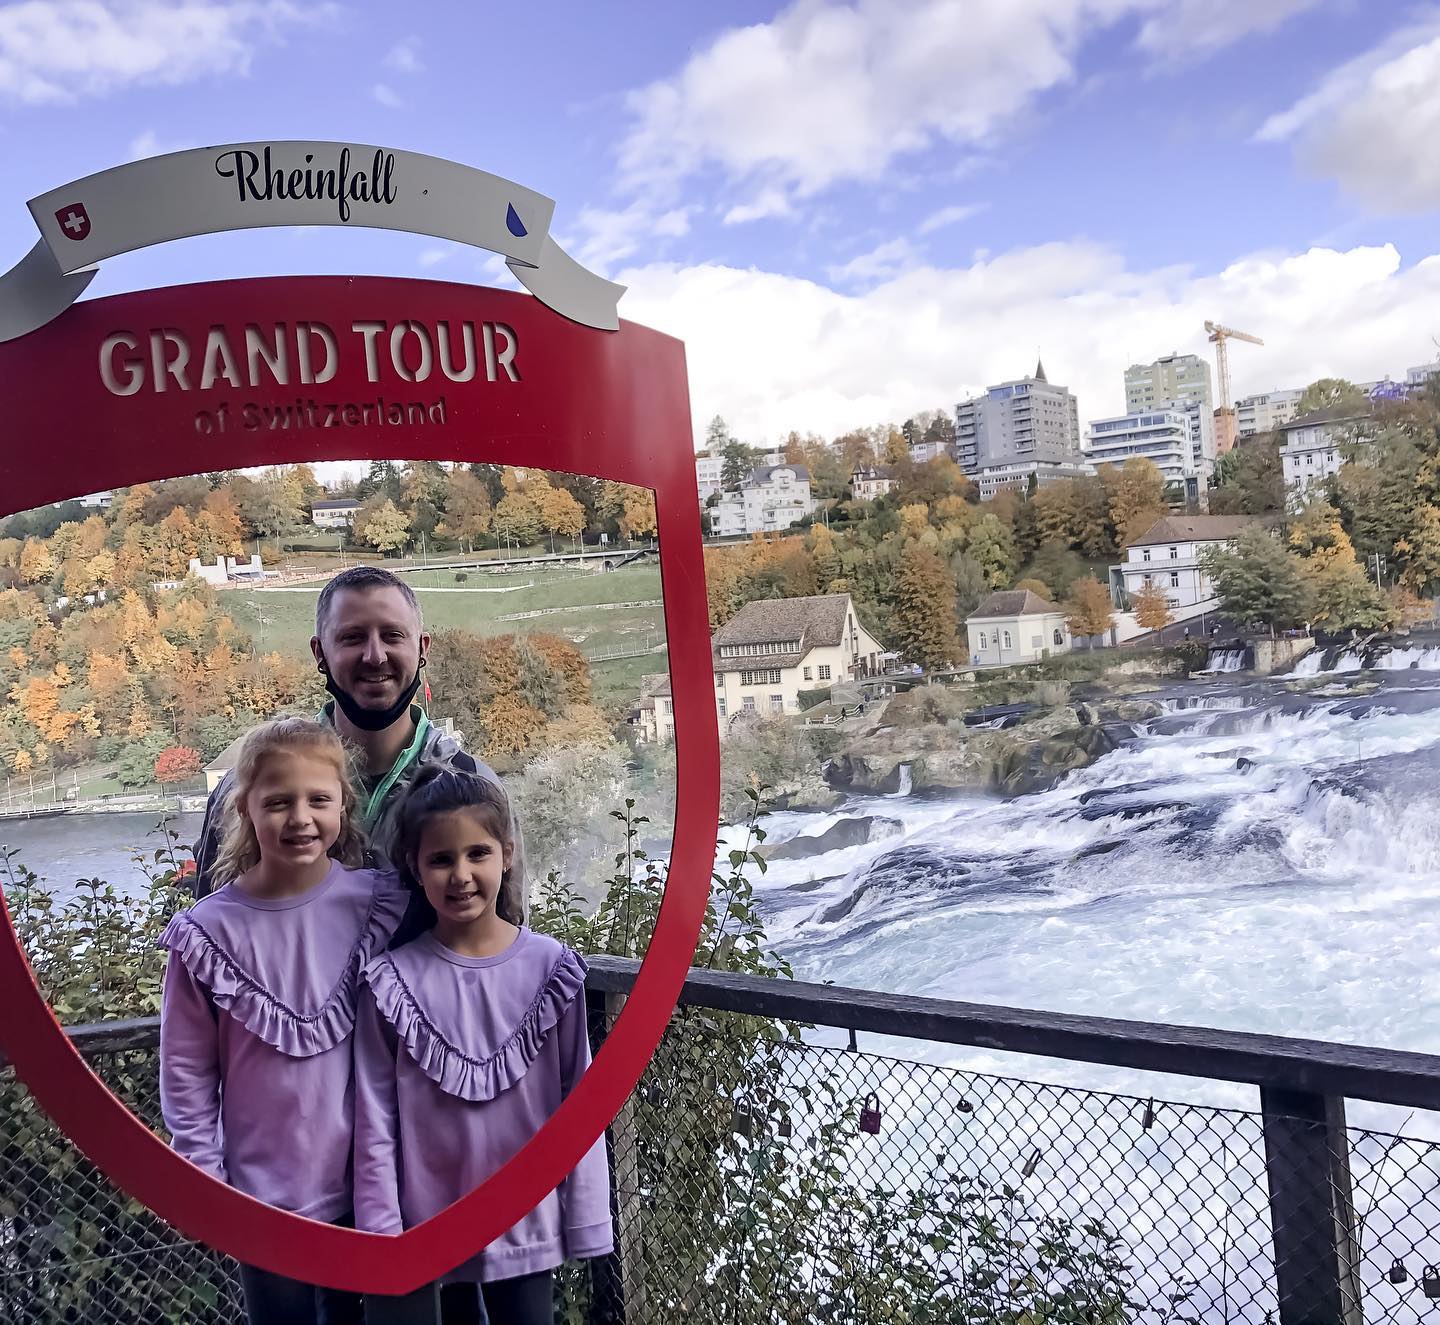 Rheinfall - Visiting 40 Photo Spots on the Grand Tour of Switzerland